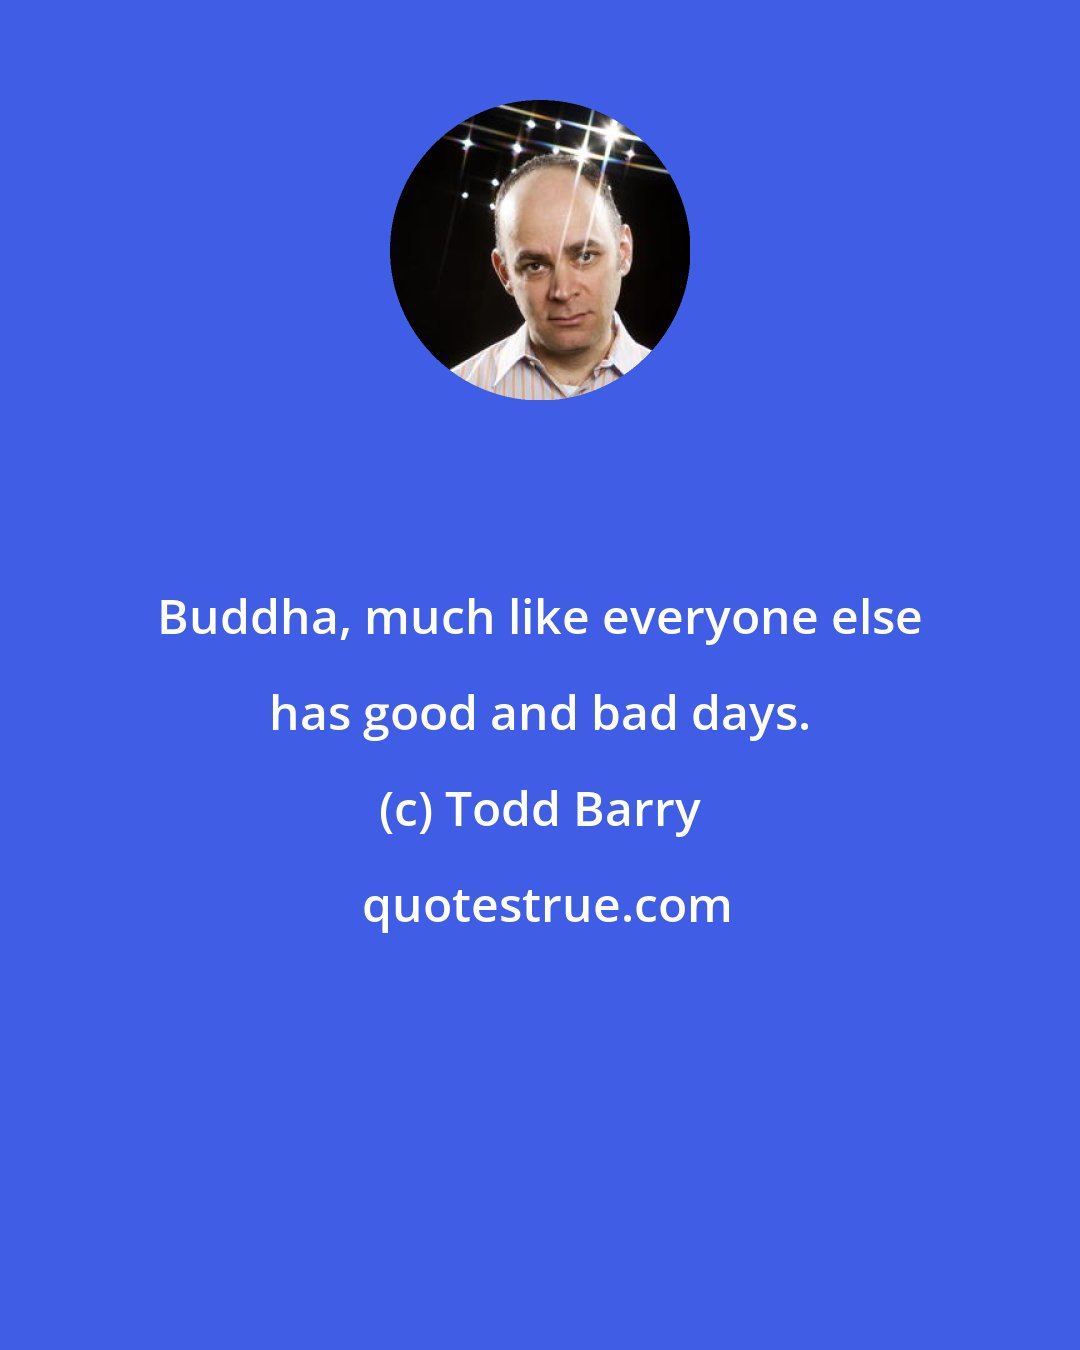 Todd Barry: Buddha, much like everyone else has good and bad days.